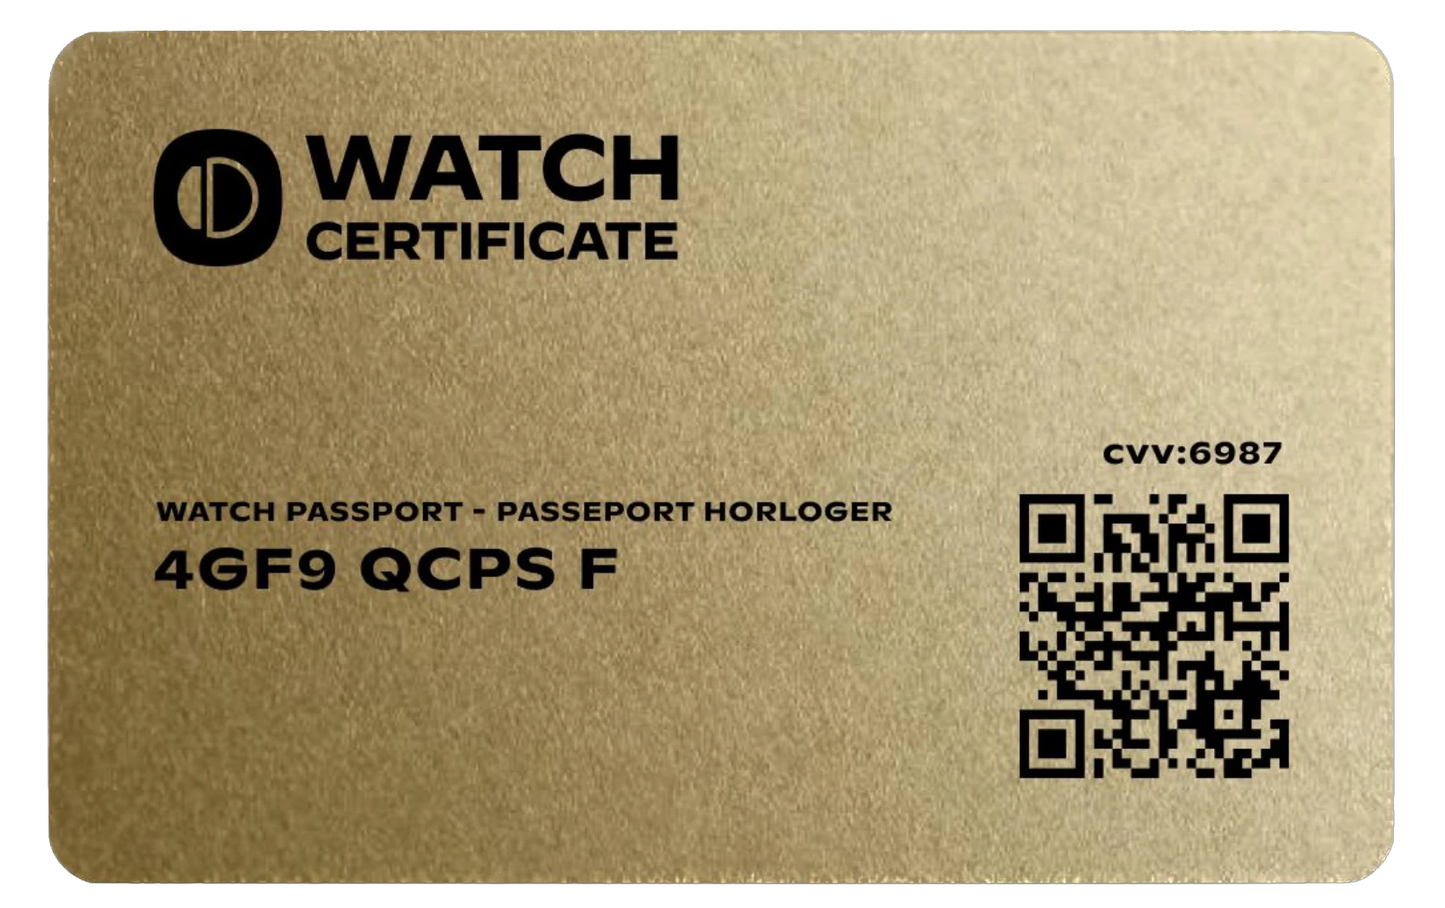 Watch Certificate - The passport for watches